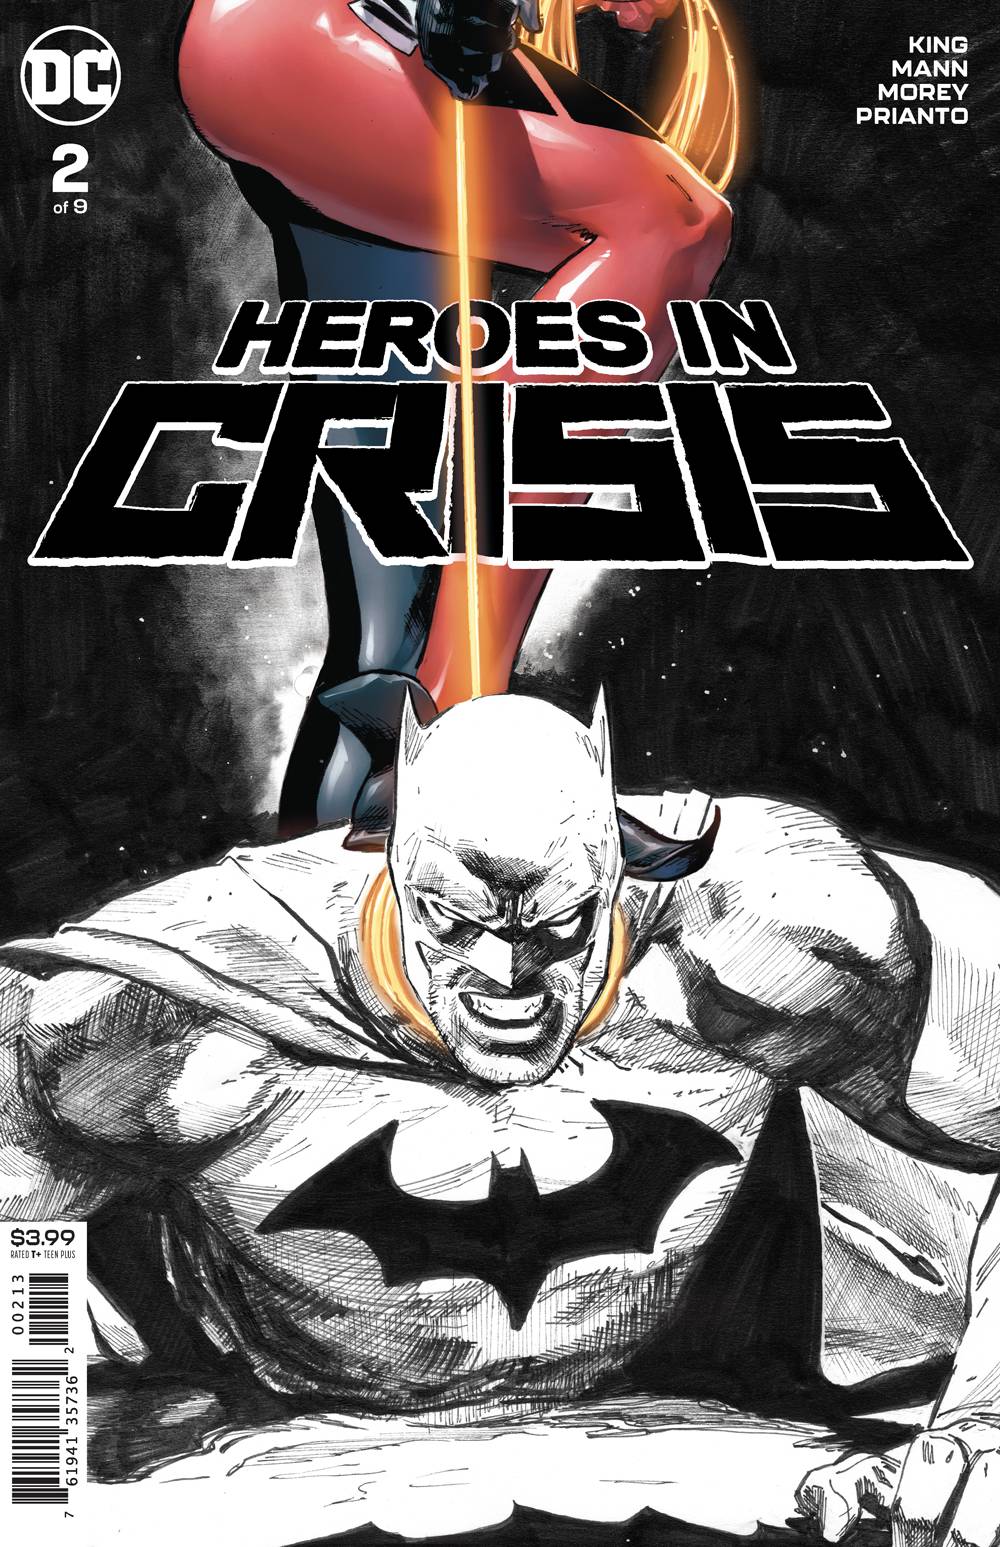 HEROES IN CRISIS #2 (OF 9) FINAL PTG